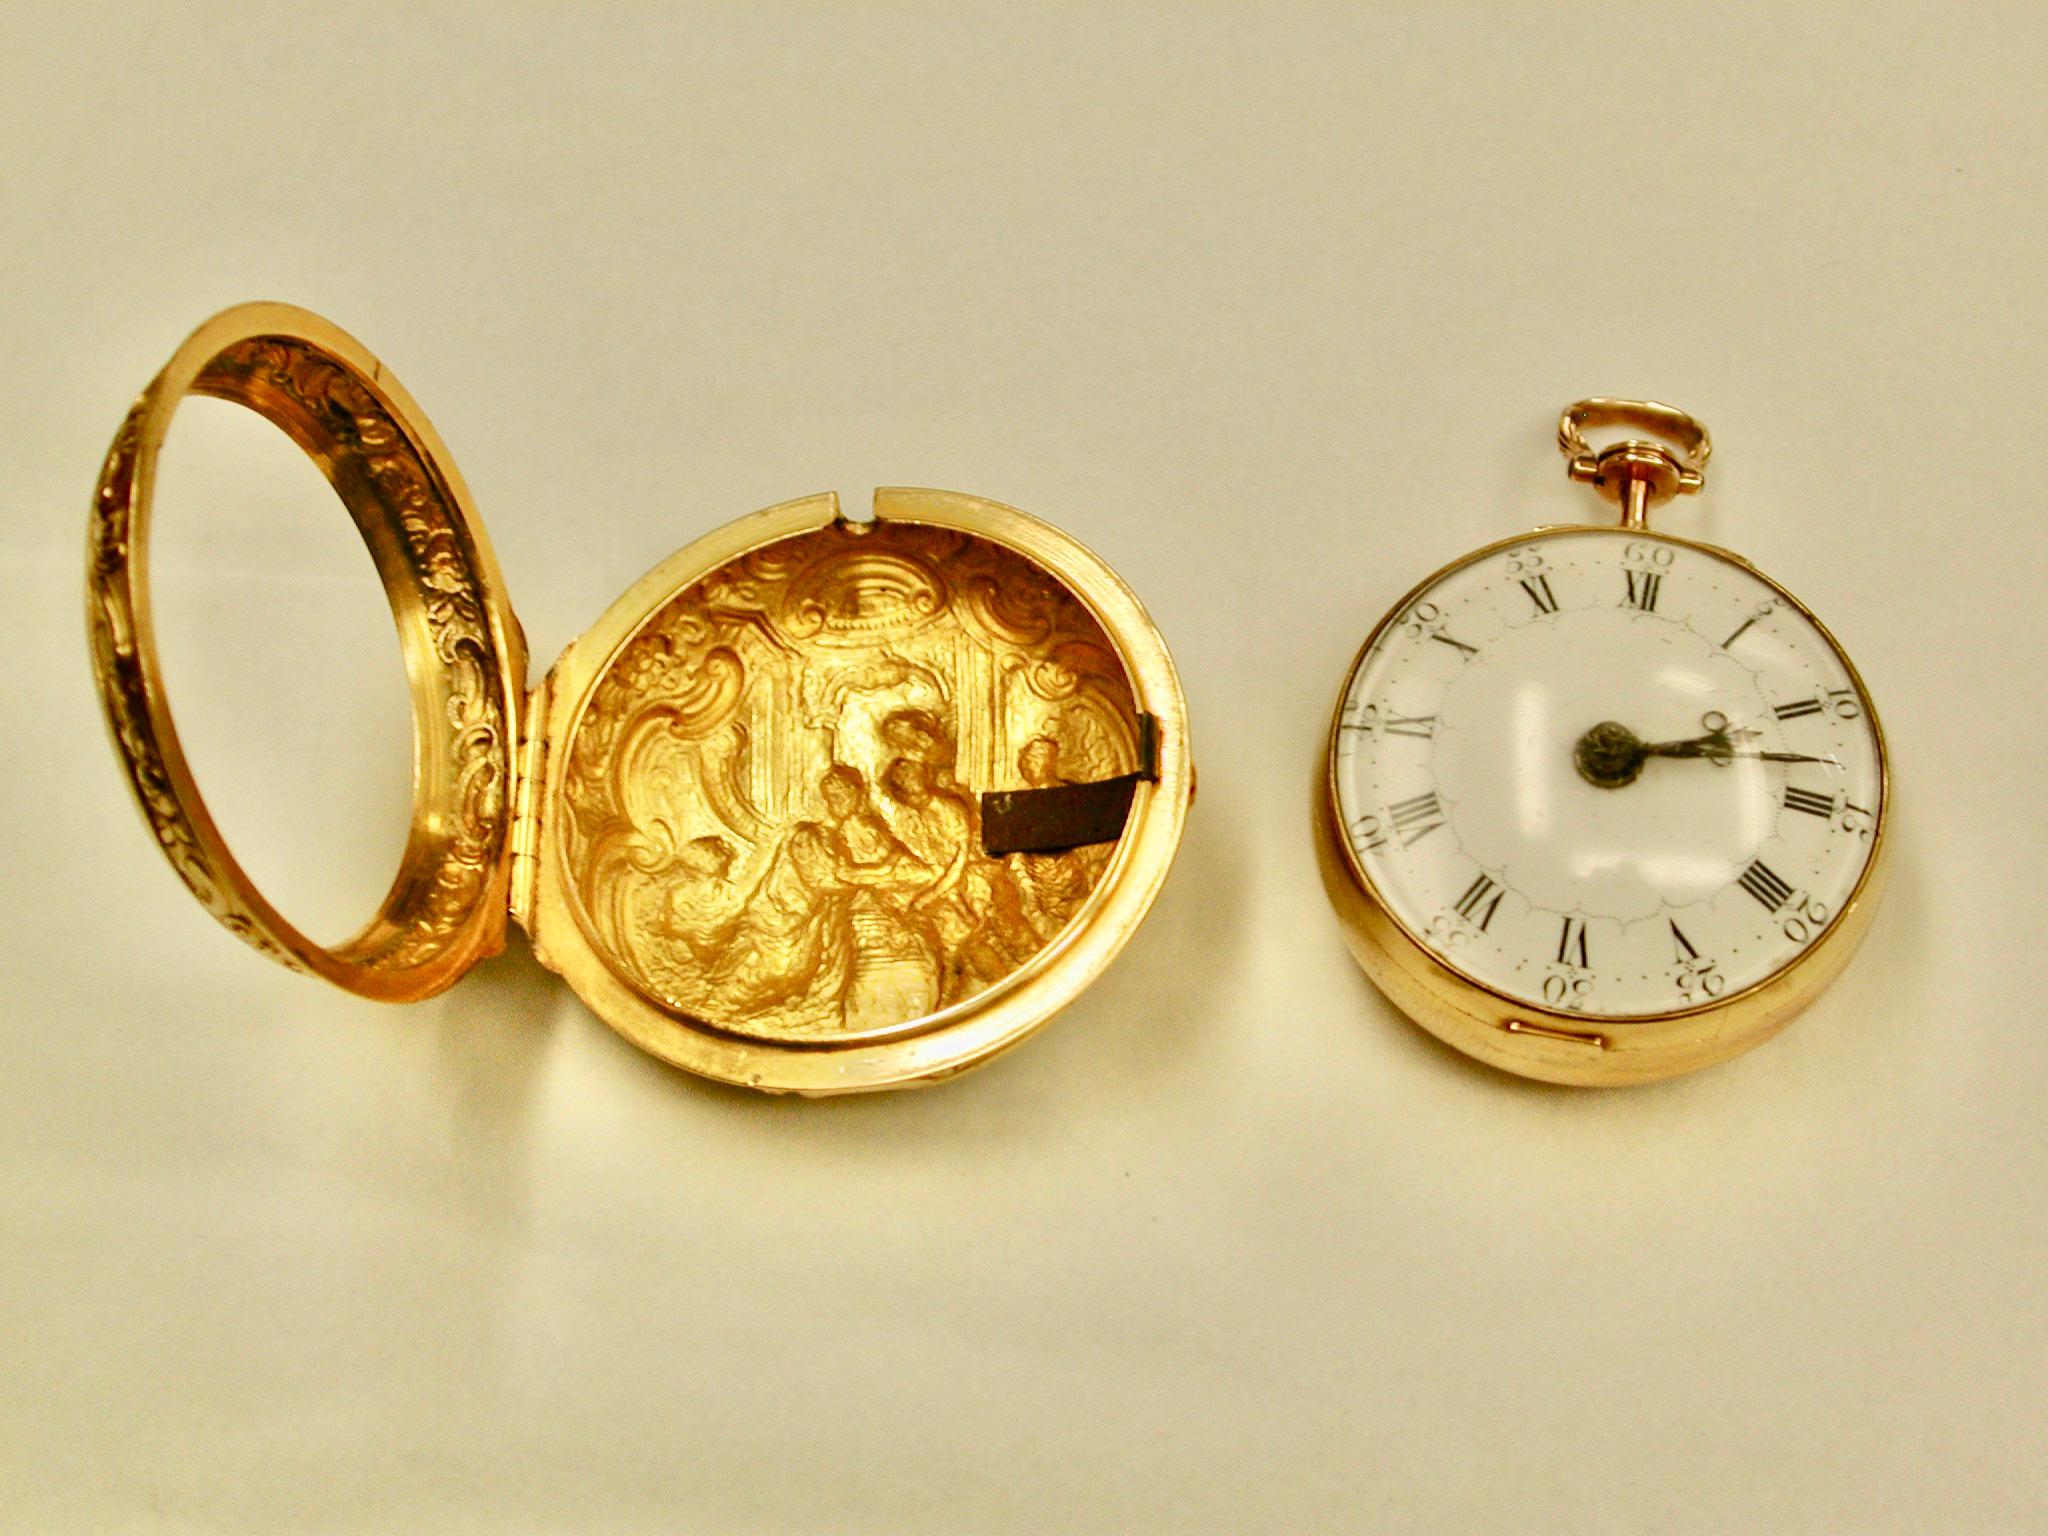 22ct Gold Repousee Pair-Cased Pocket Watch Maker Thomas Rea 1769
The movement was made in Walton-On-Trent by Thomas Rea and the beautiful pair-case was made by I W of London.
This watch has a verge escapement with a hand pierced and engraved balance